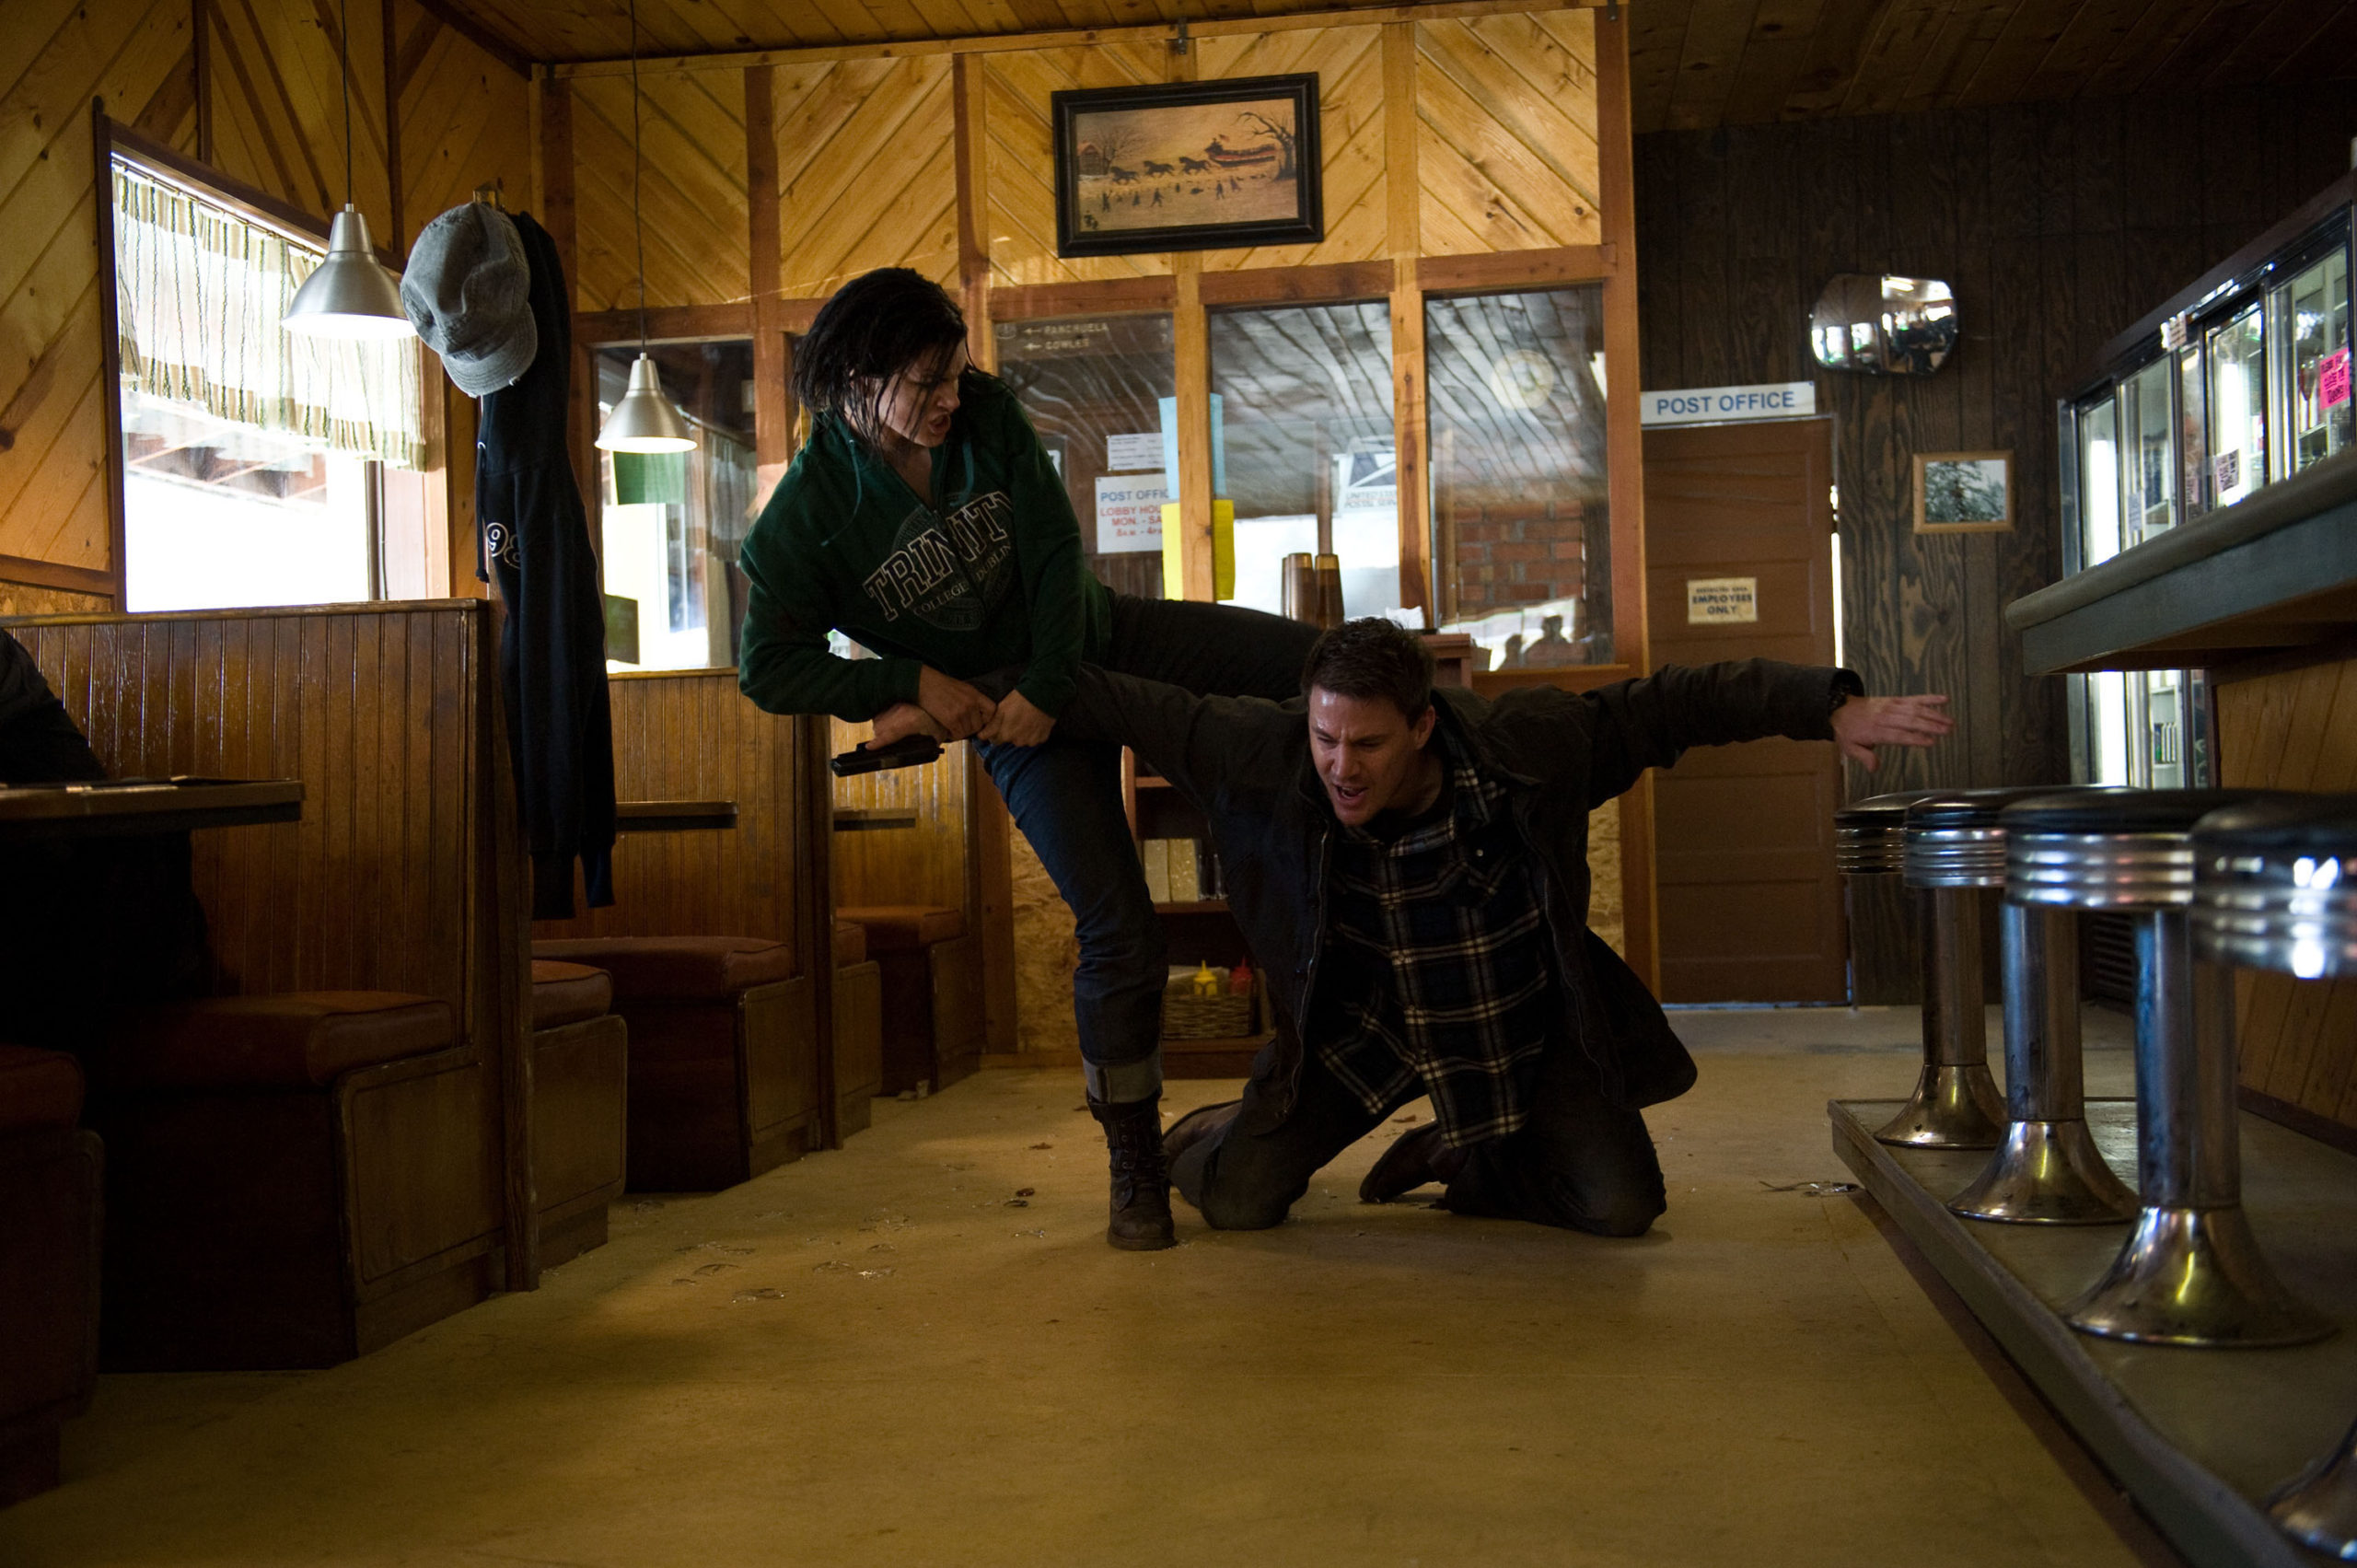 Channing Tatum is Taken Down by Gina Carano